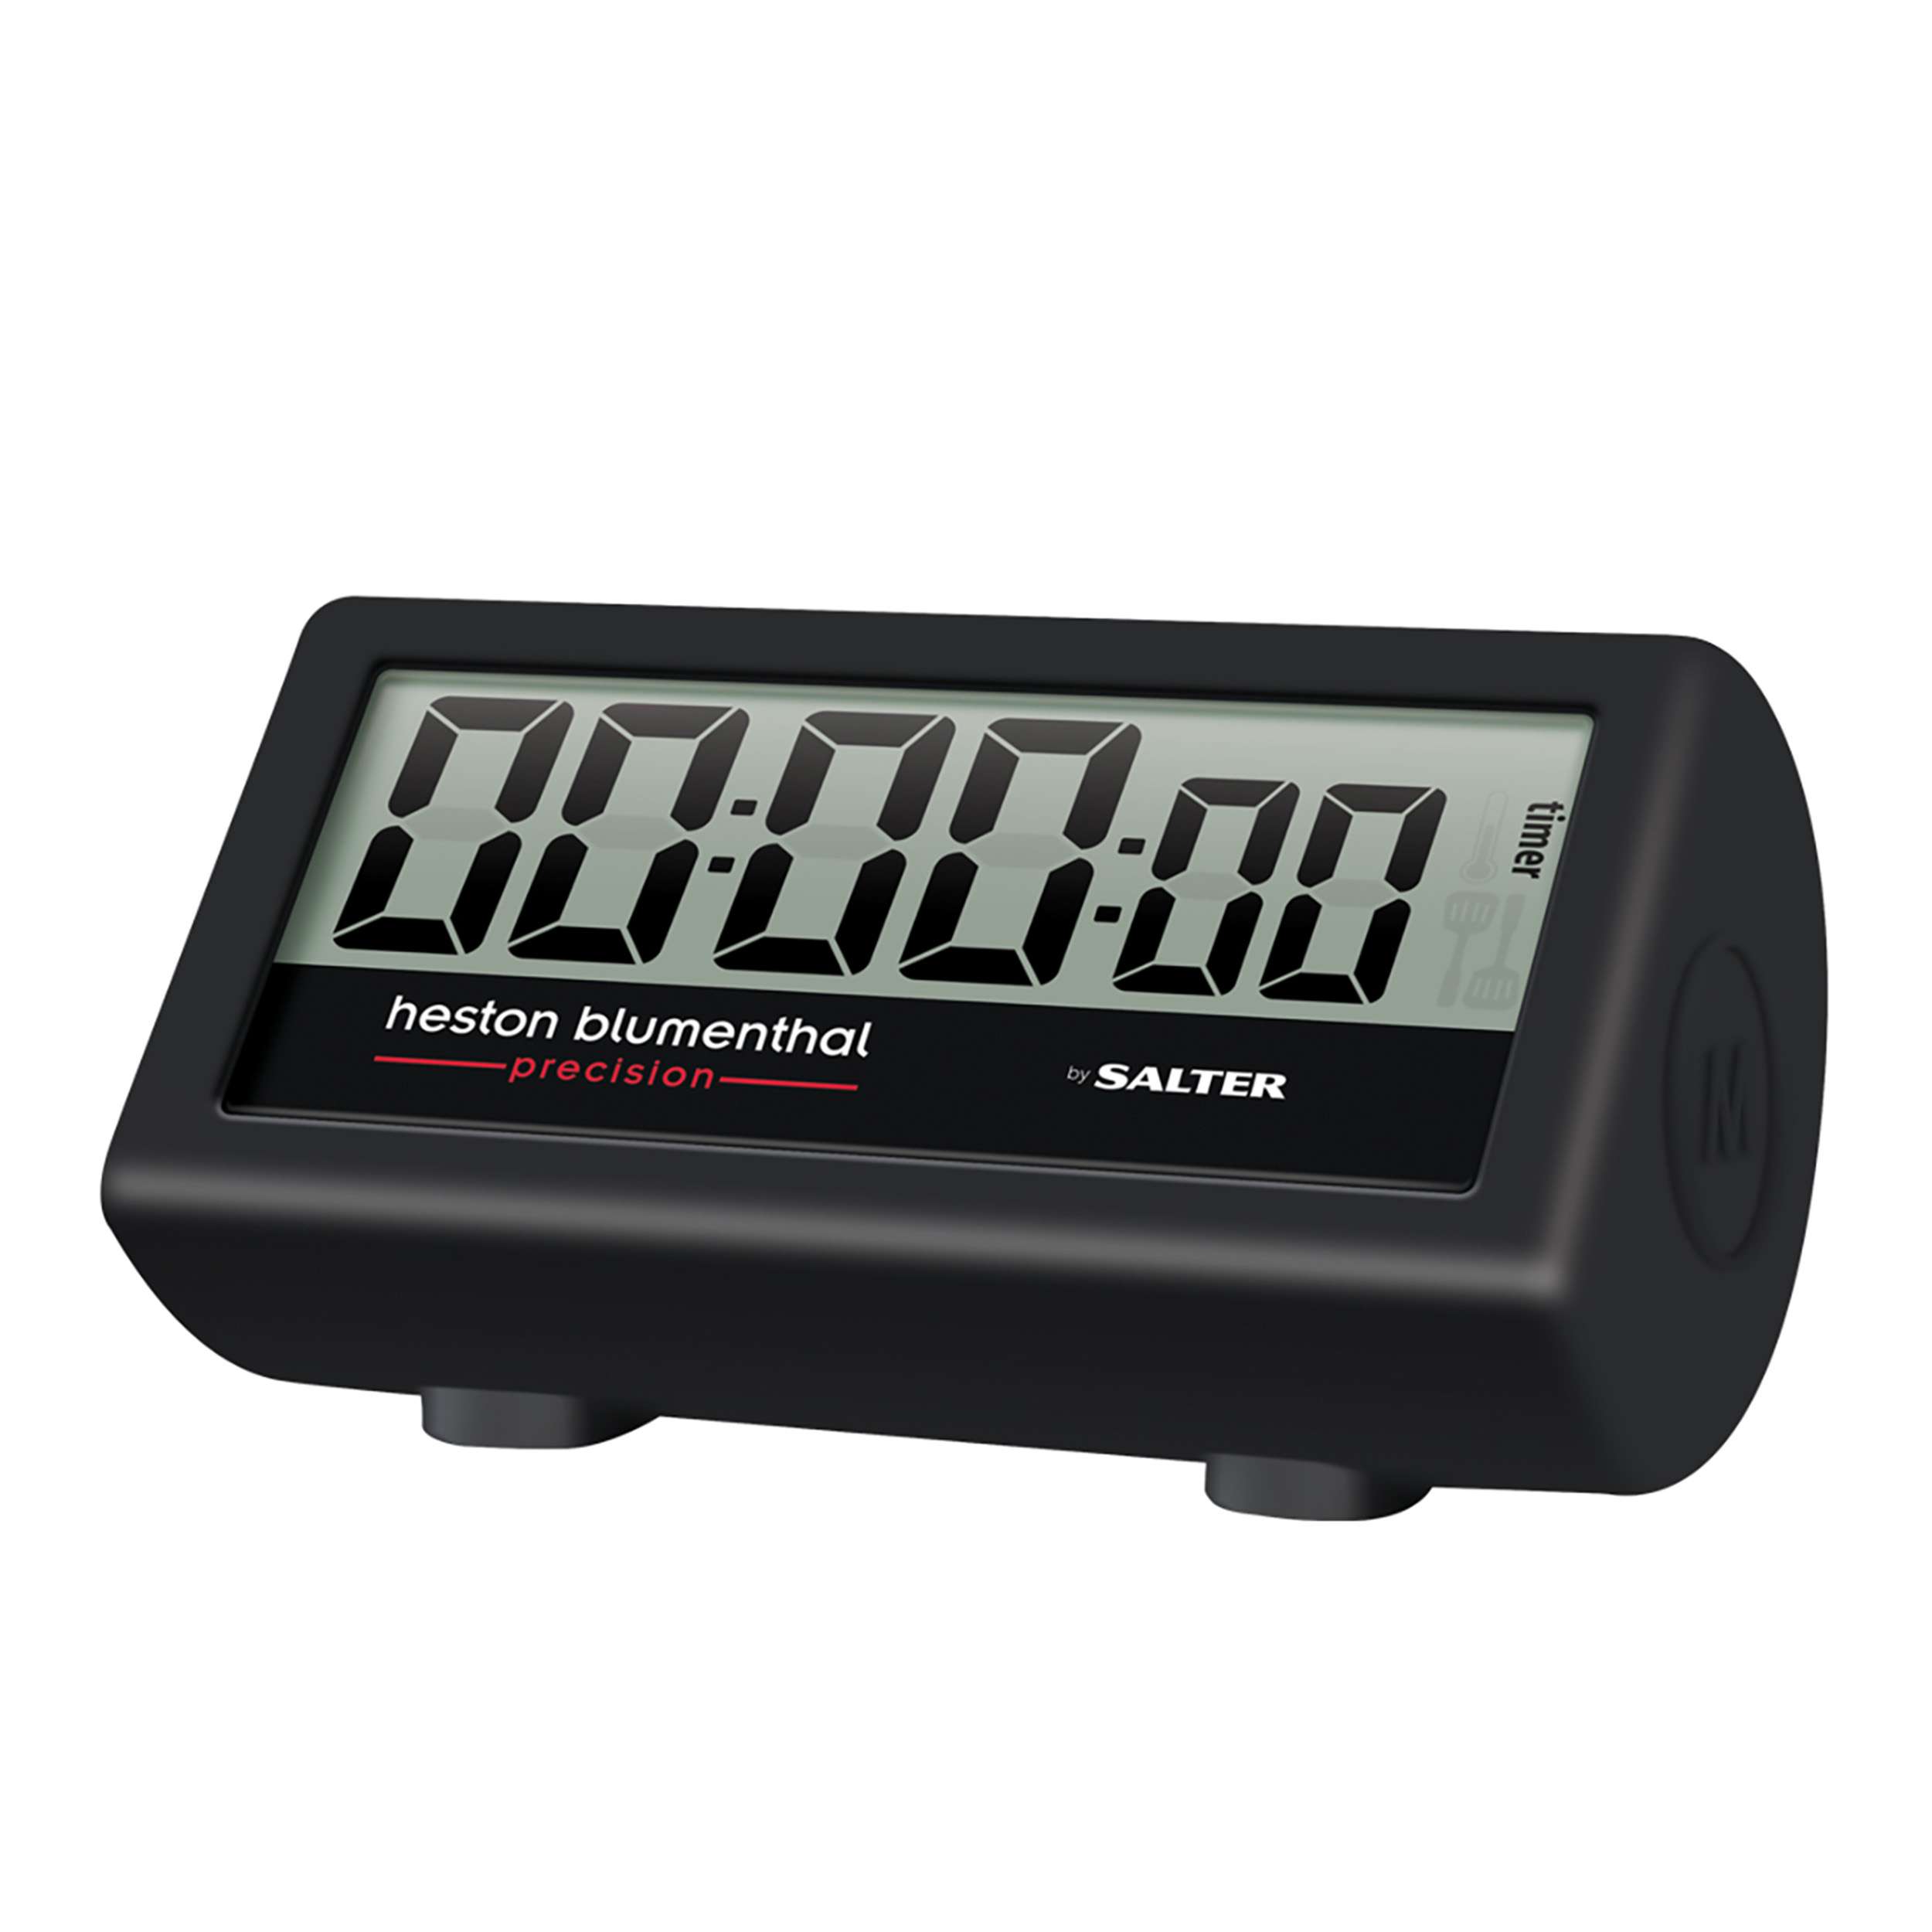 TIMER FOR LAB,KITCHEN,SPORTS,GENERAL PURPOSE